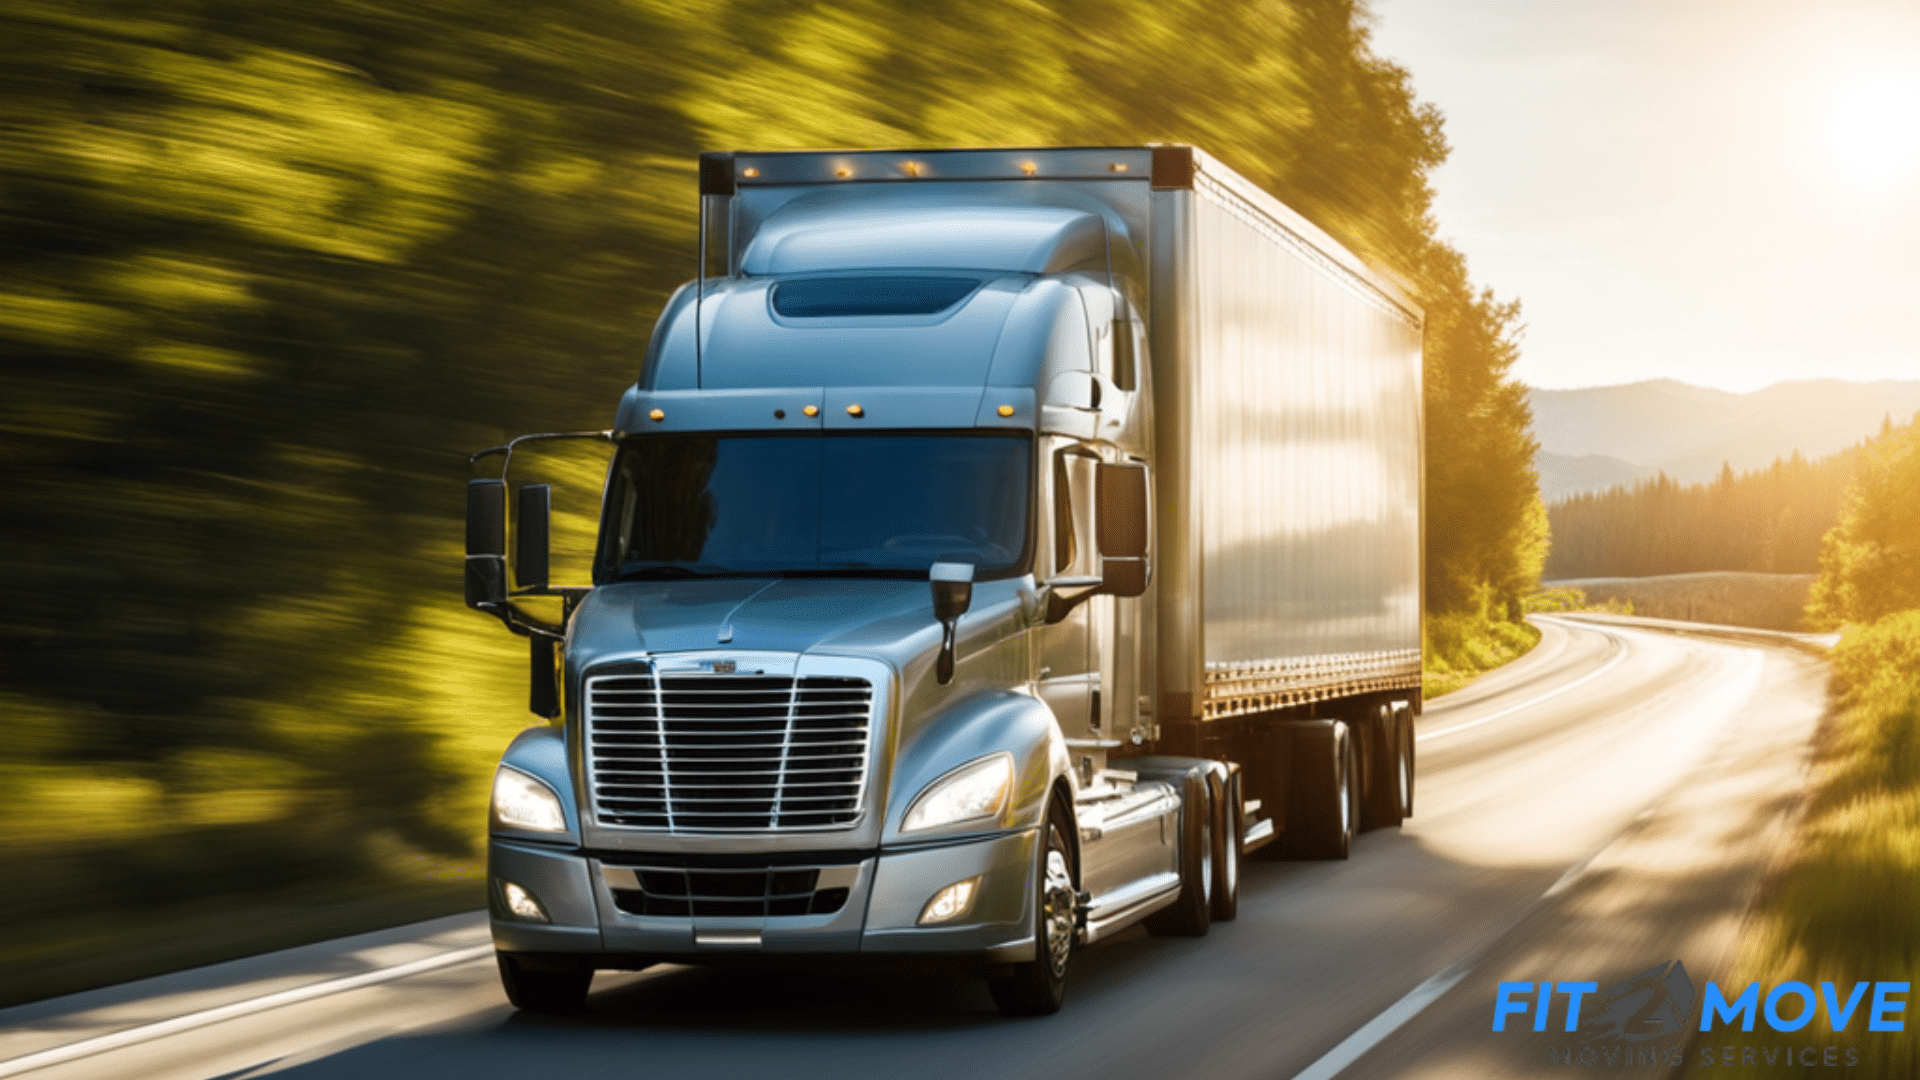 Long Distance Movers Companies in York County New Hampshire